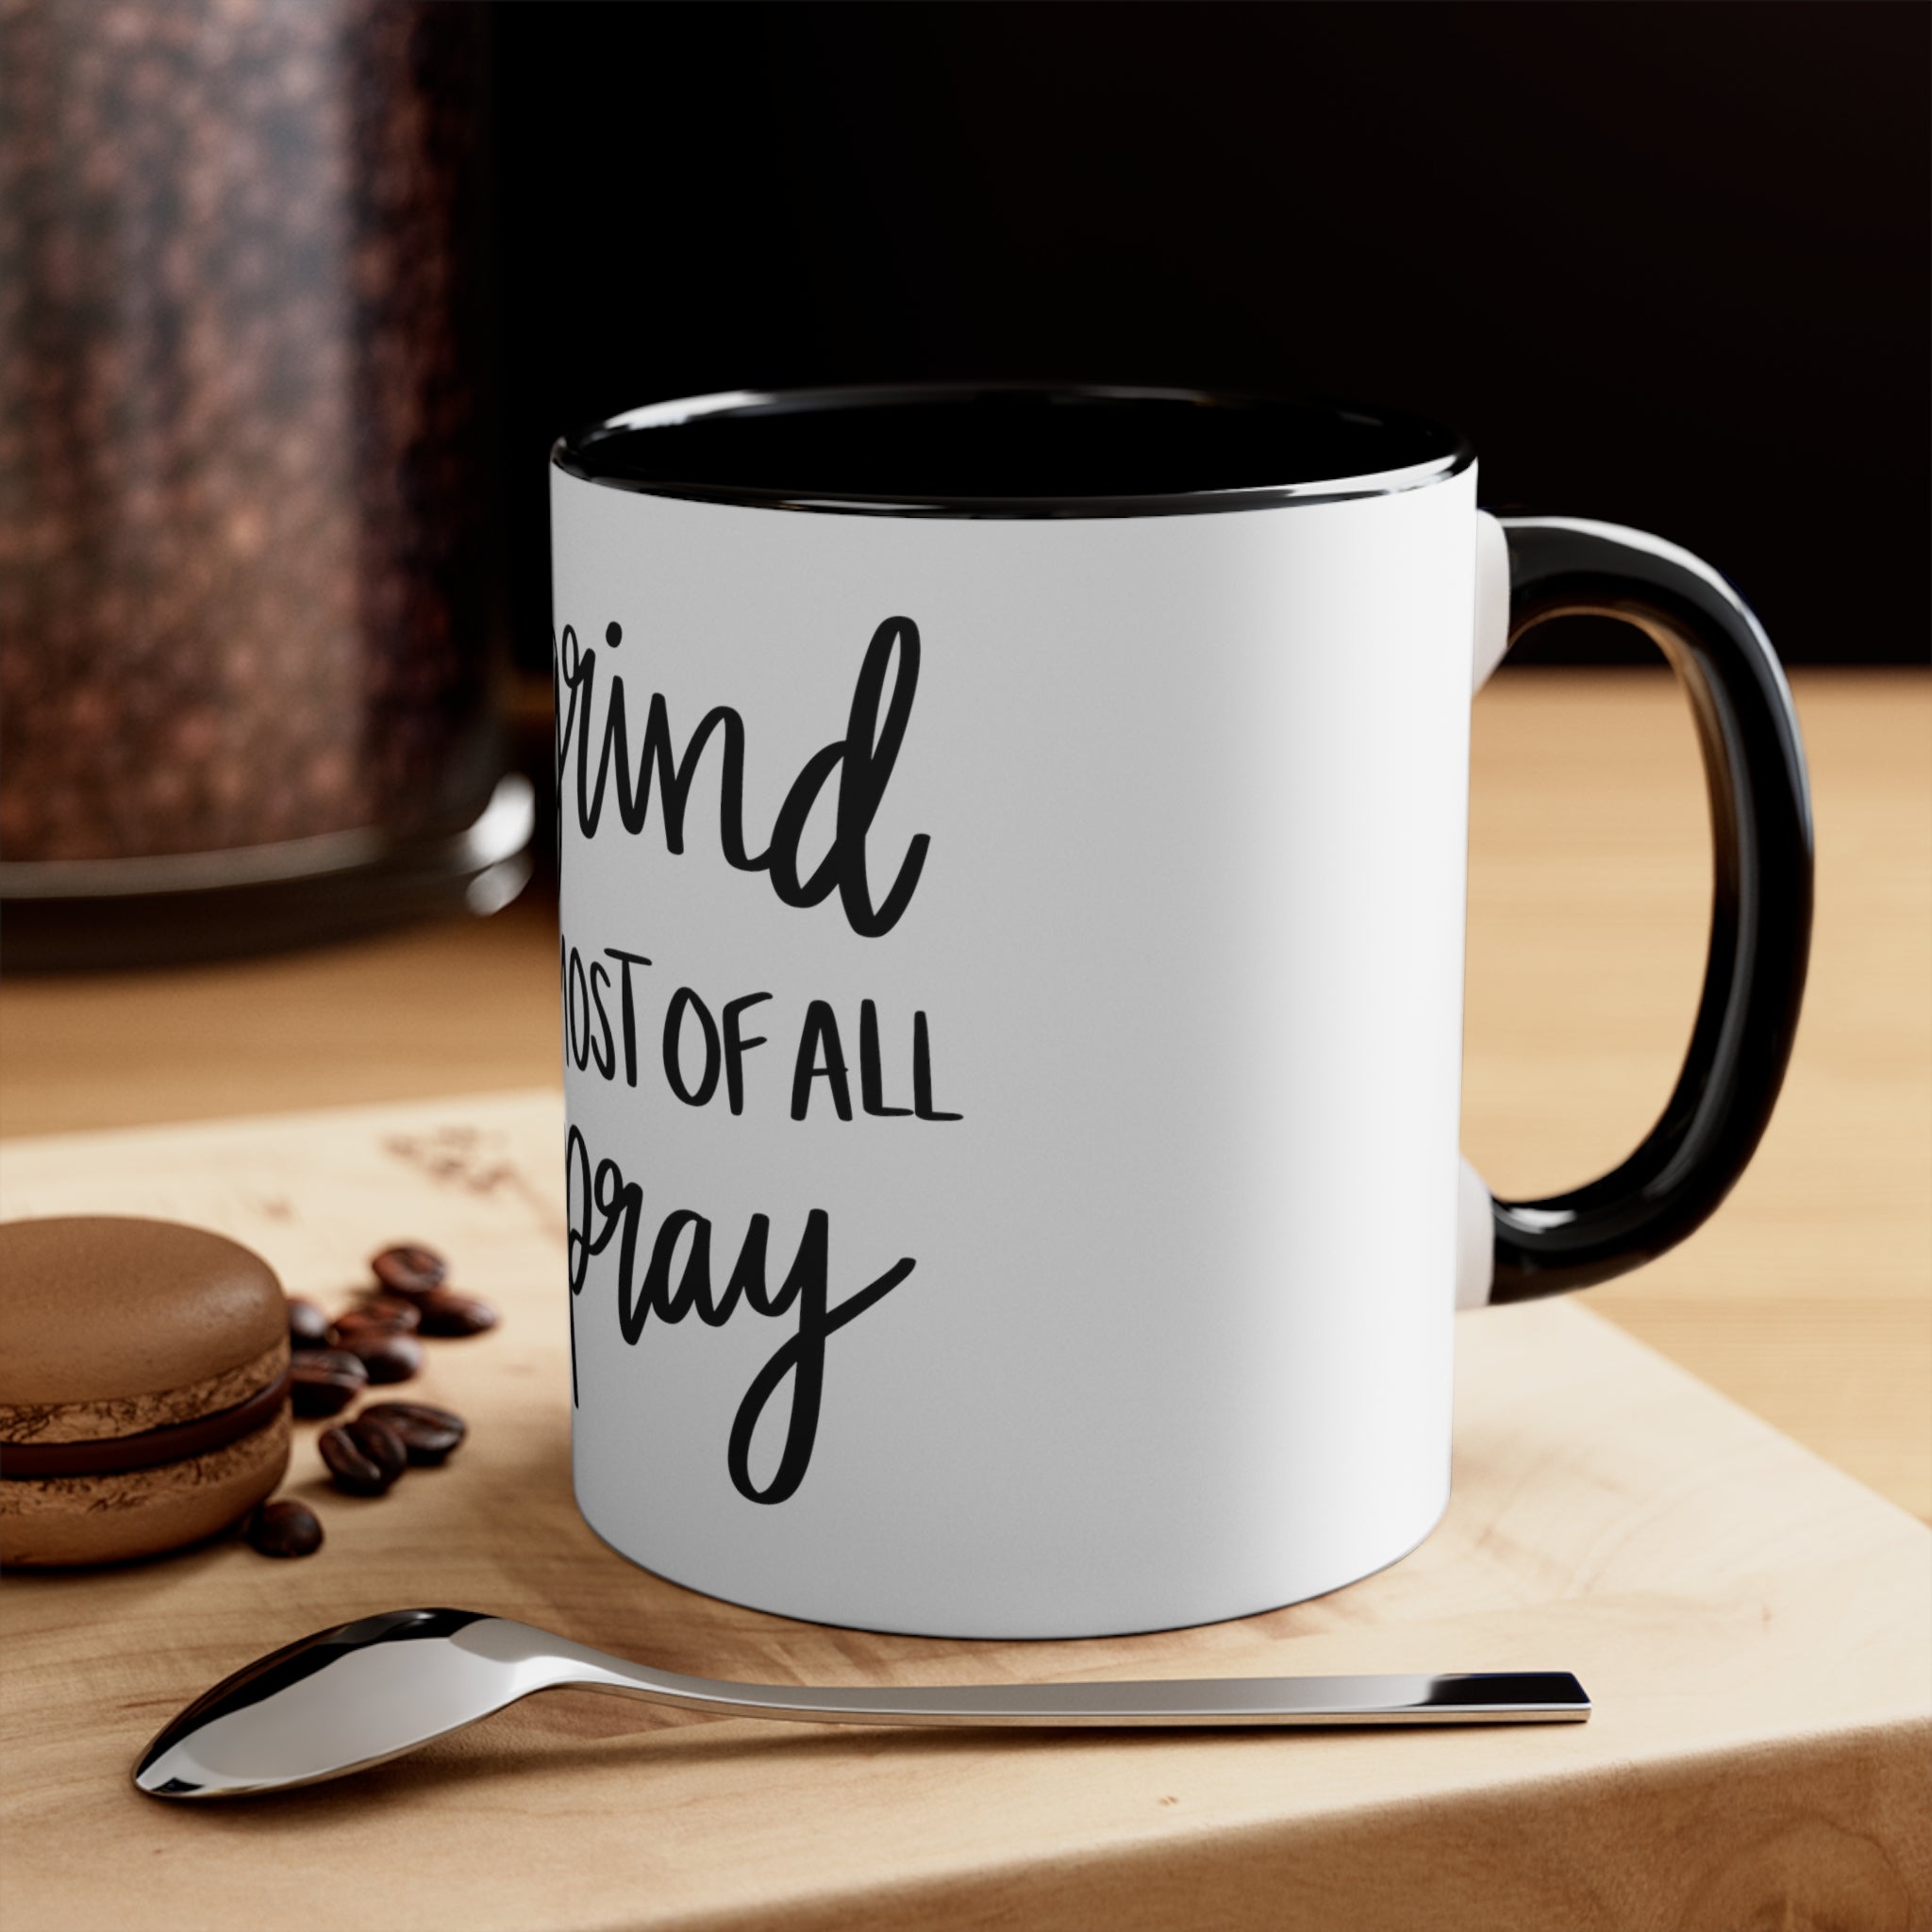 I Grind But Most Of All I Pray Accent Coffee Mug, 11oz